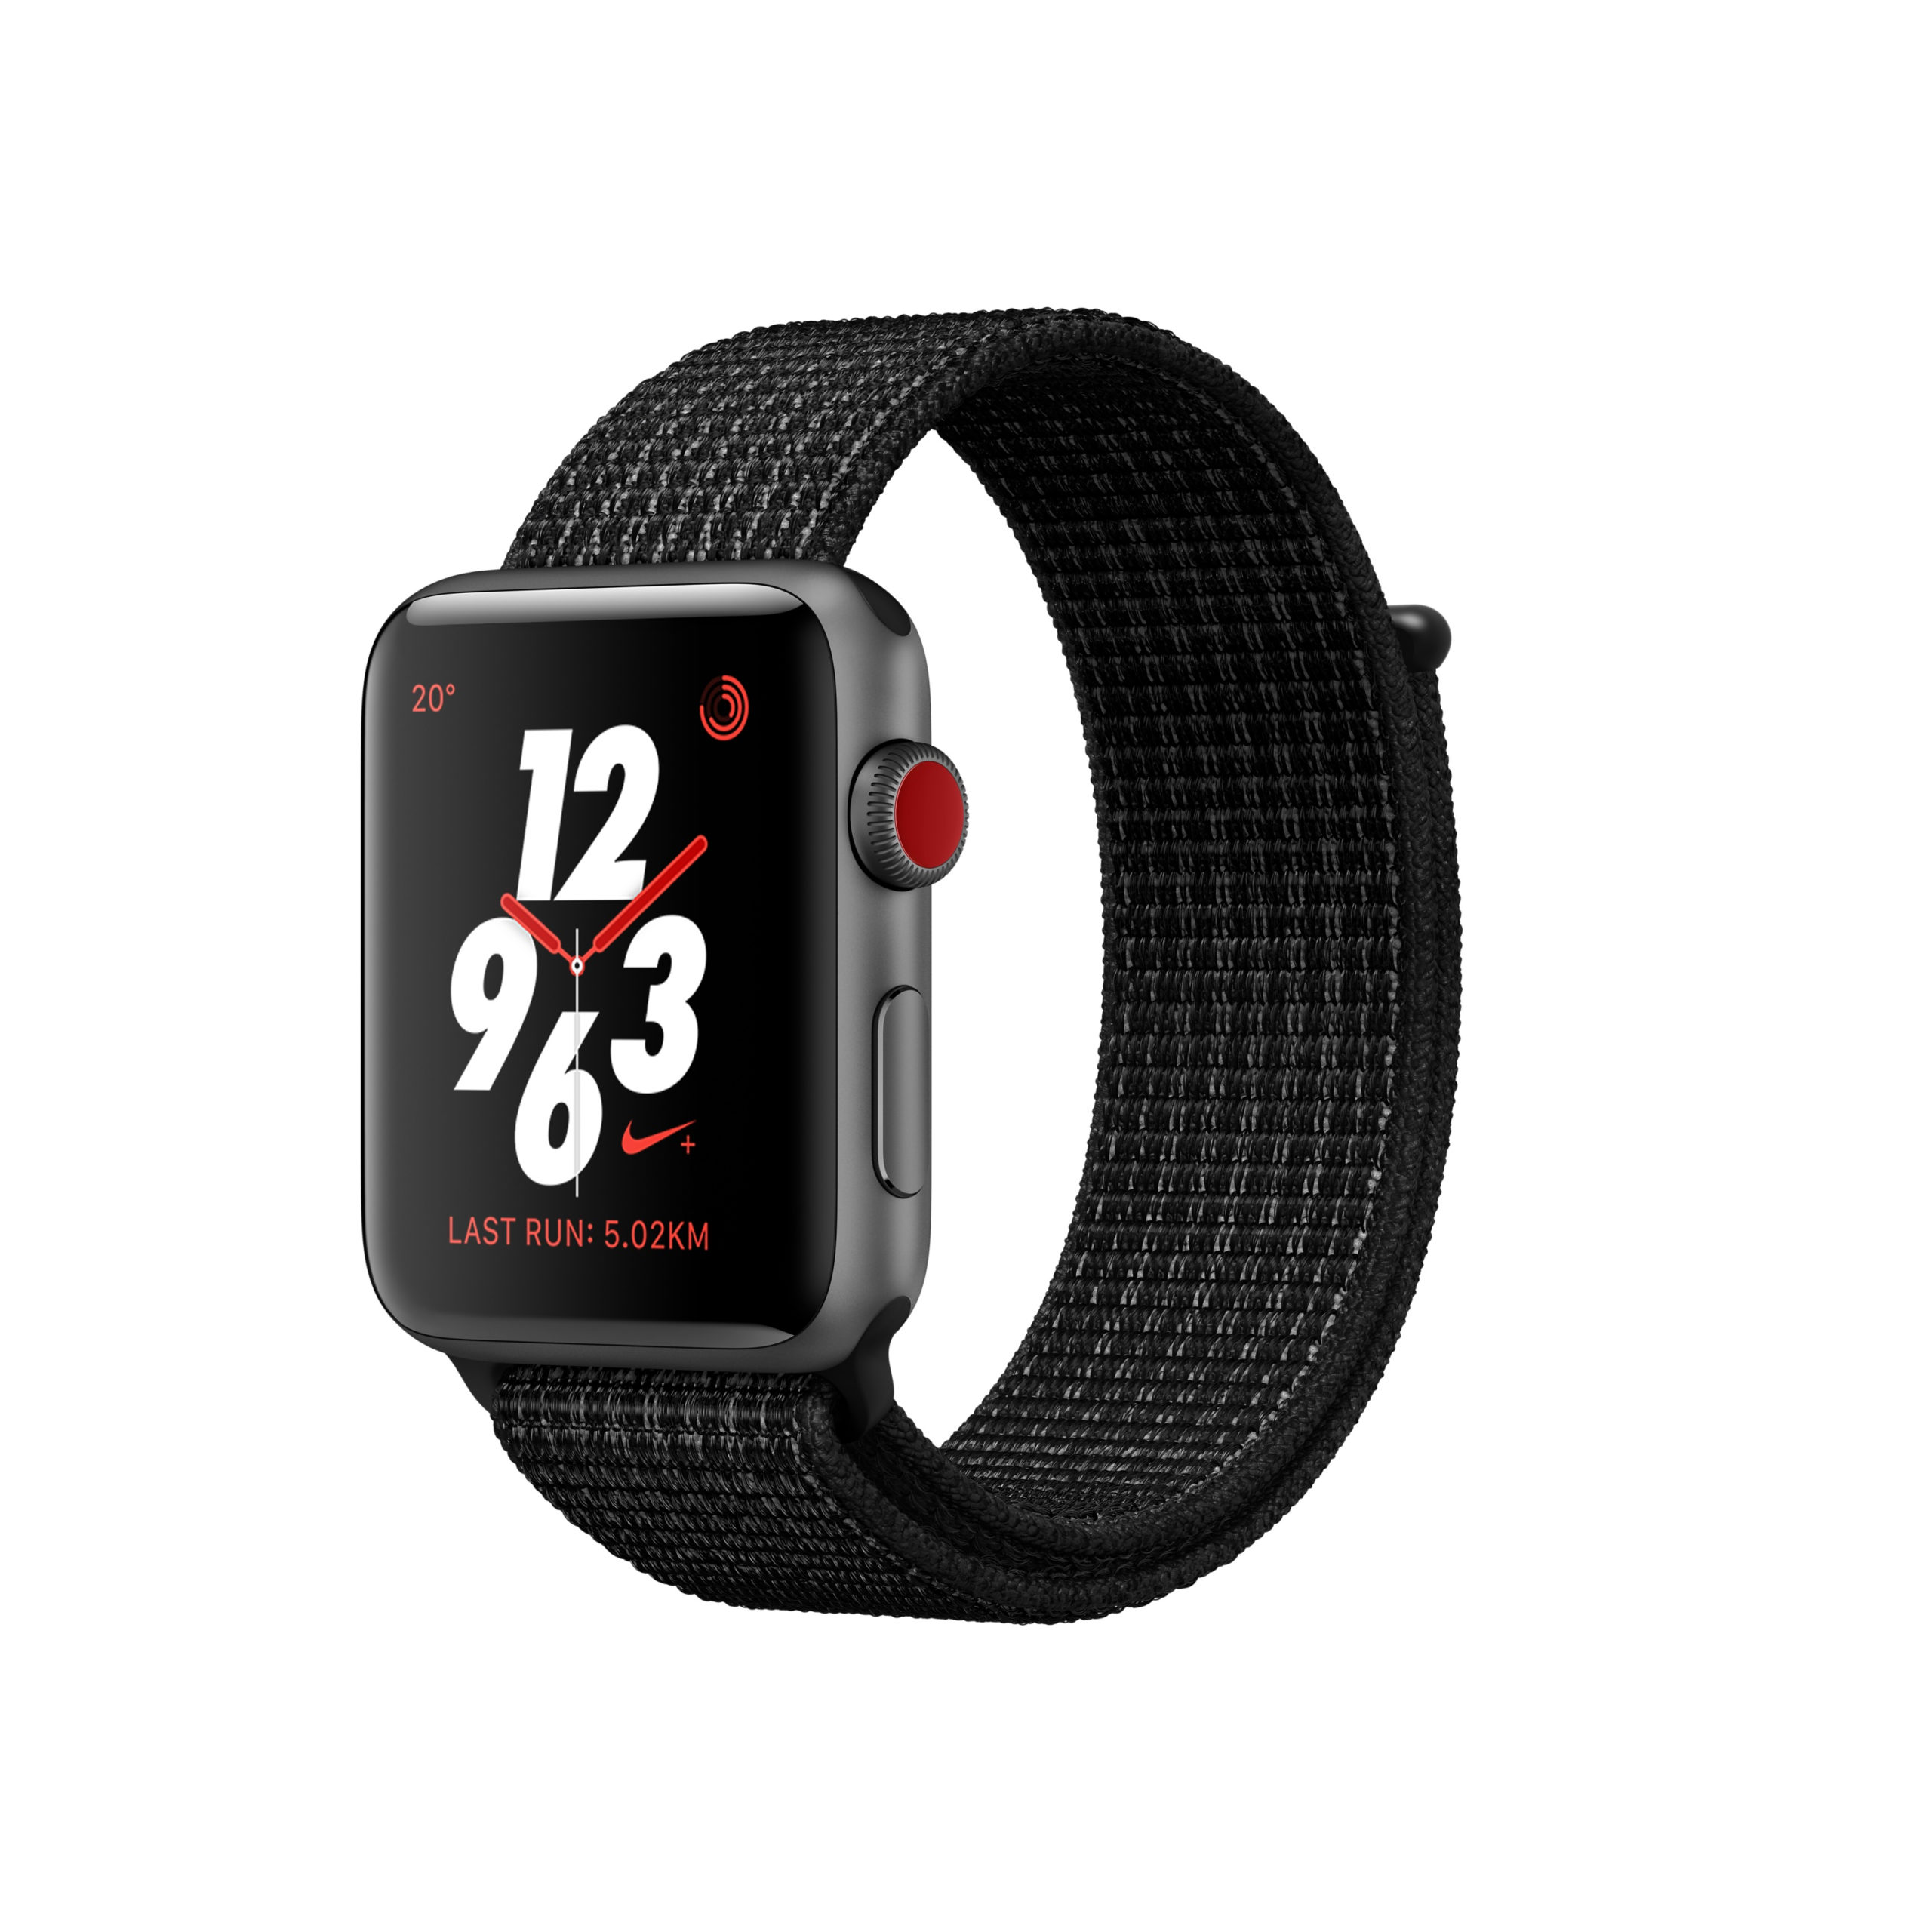 MQLF2LL/A - $180 - Apple Watch Nike+ Series 3 GPS + Cellular 42mm Space Gray Aluminum Case with 